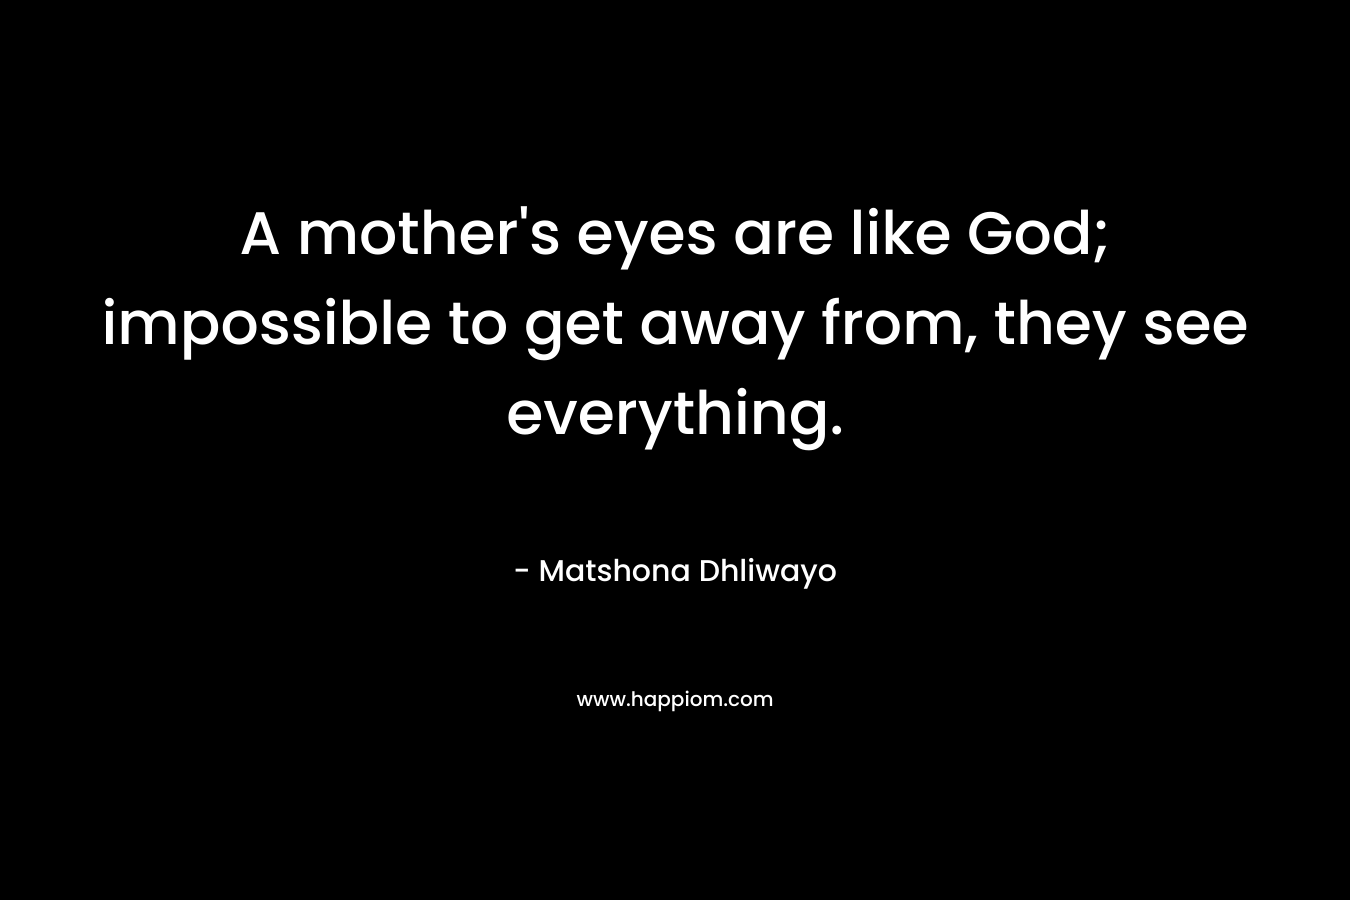 A mother’s eyes are like God; impossible to get away from, they see everything. – Matshona Dhliwayo